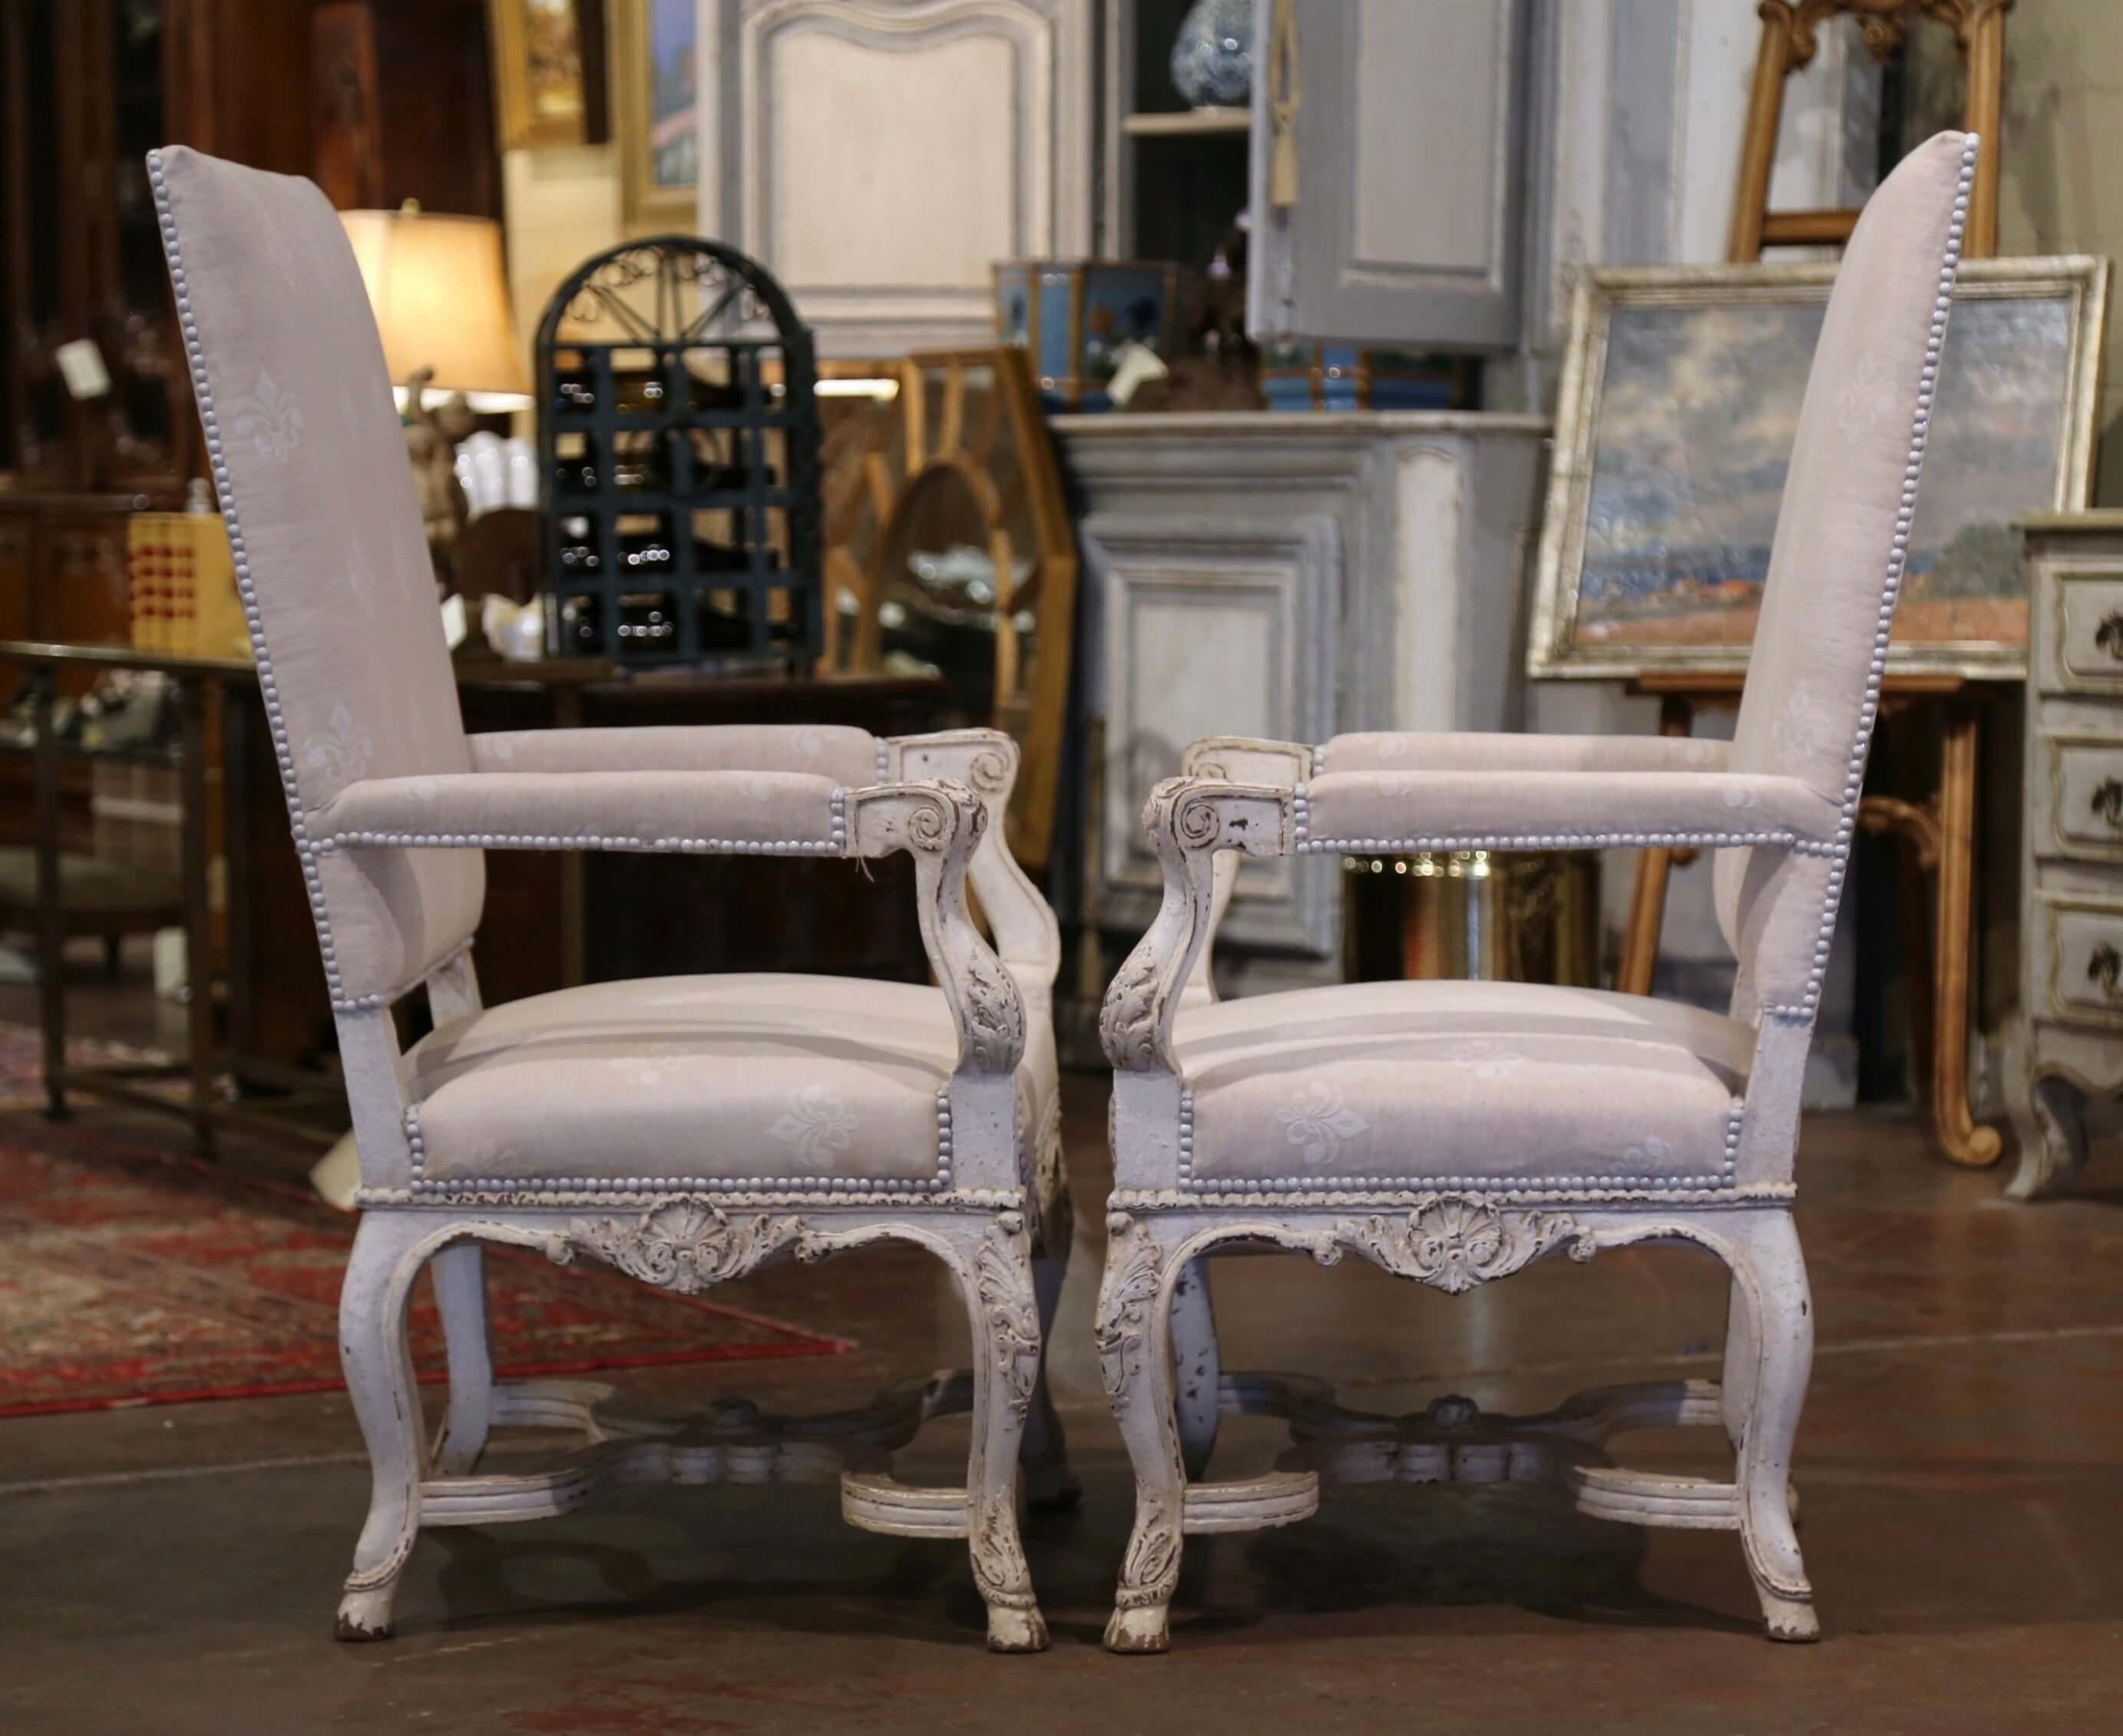 Pair of 19th Century Louis XIV Carved Painted Armchairs with Fleur-de-Lys Fabric For Sale 4